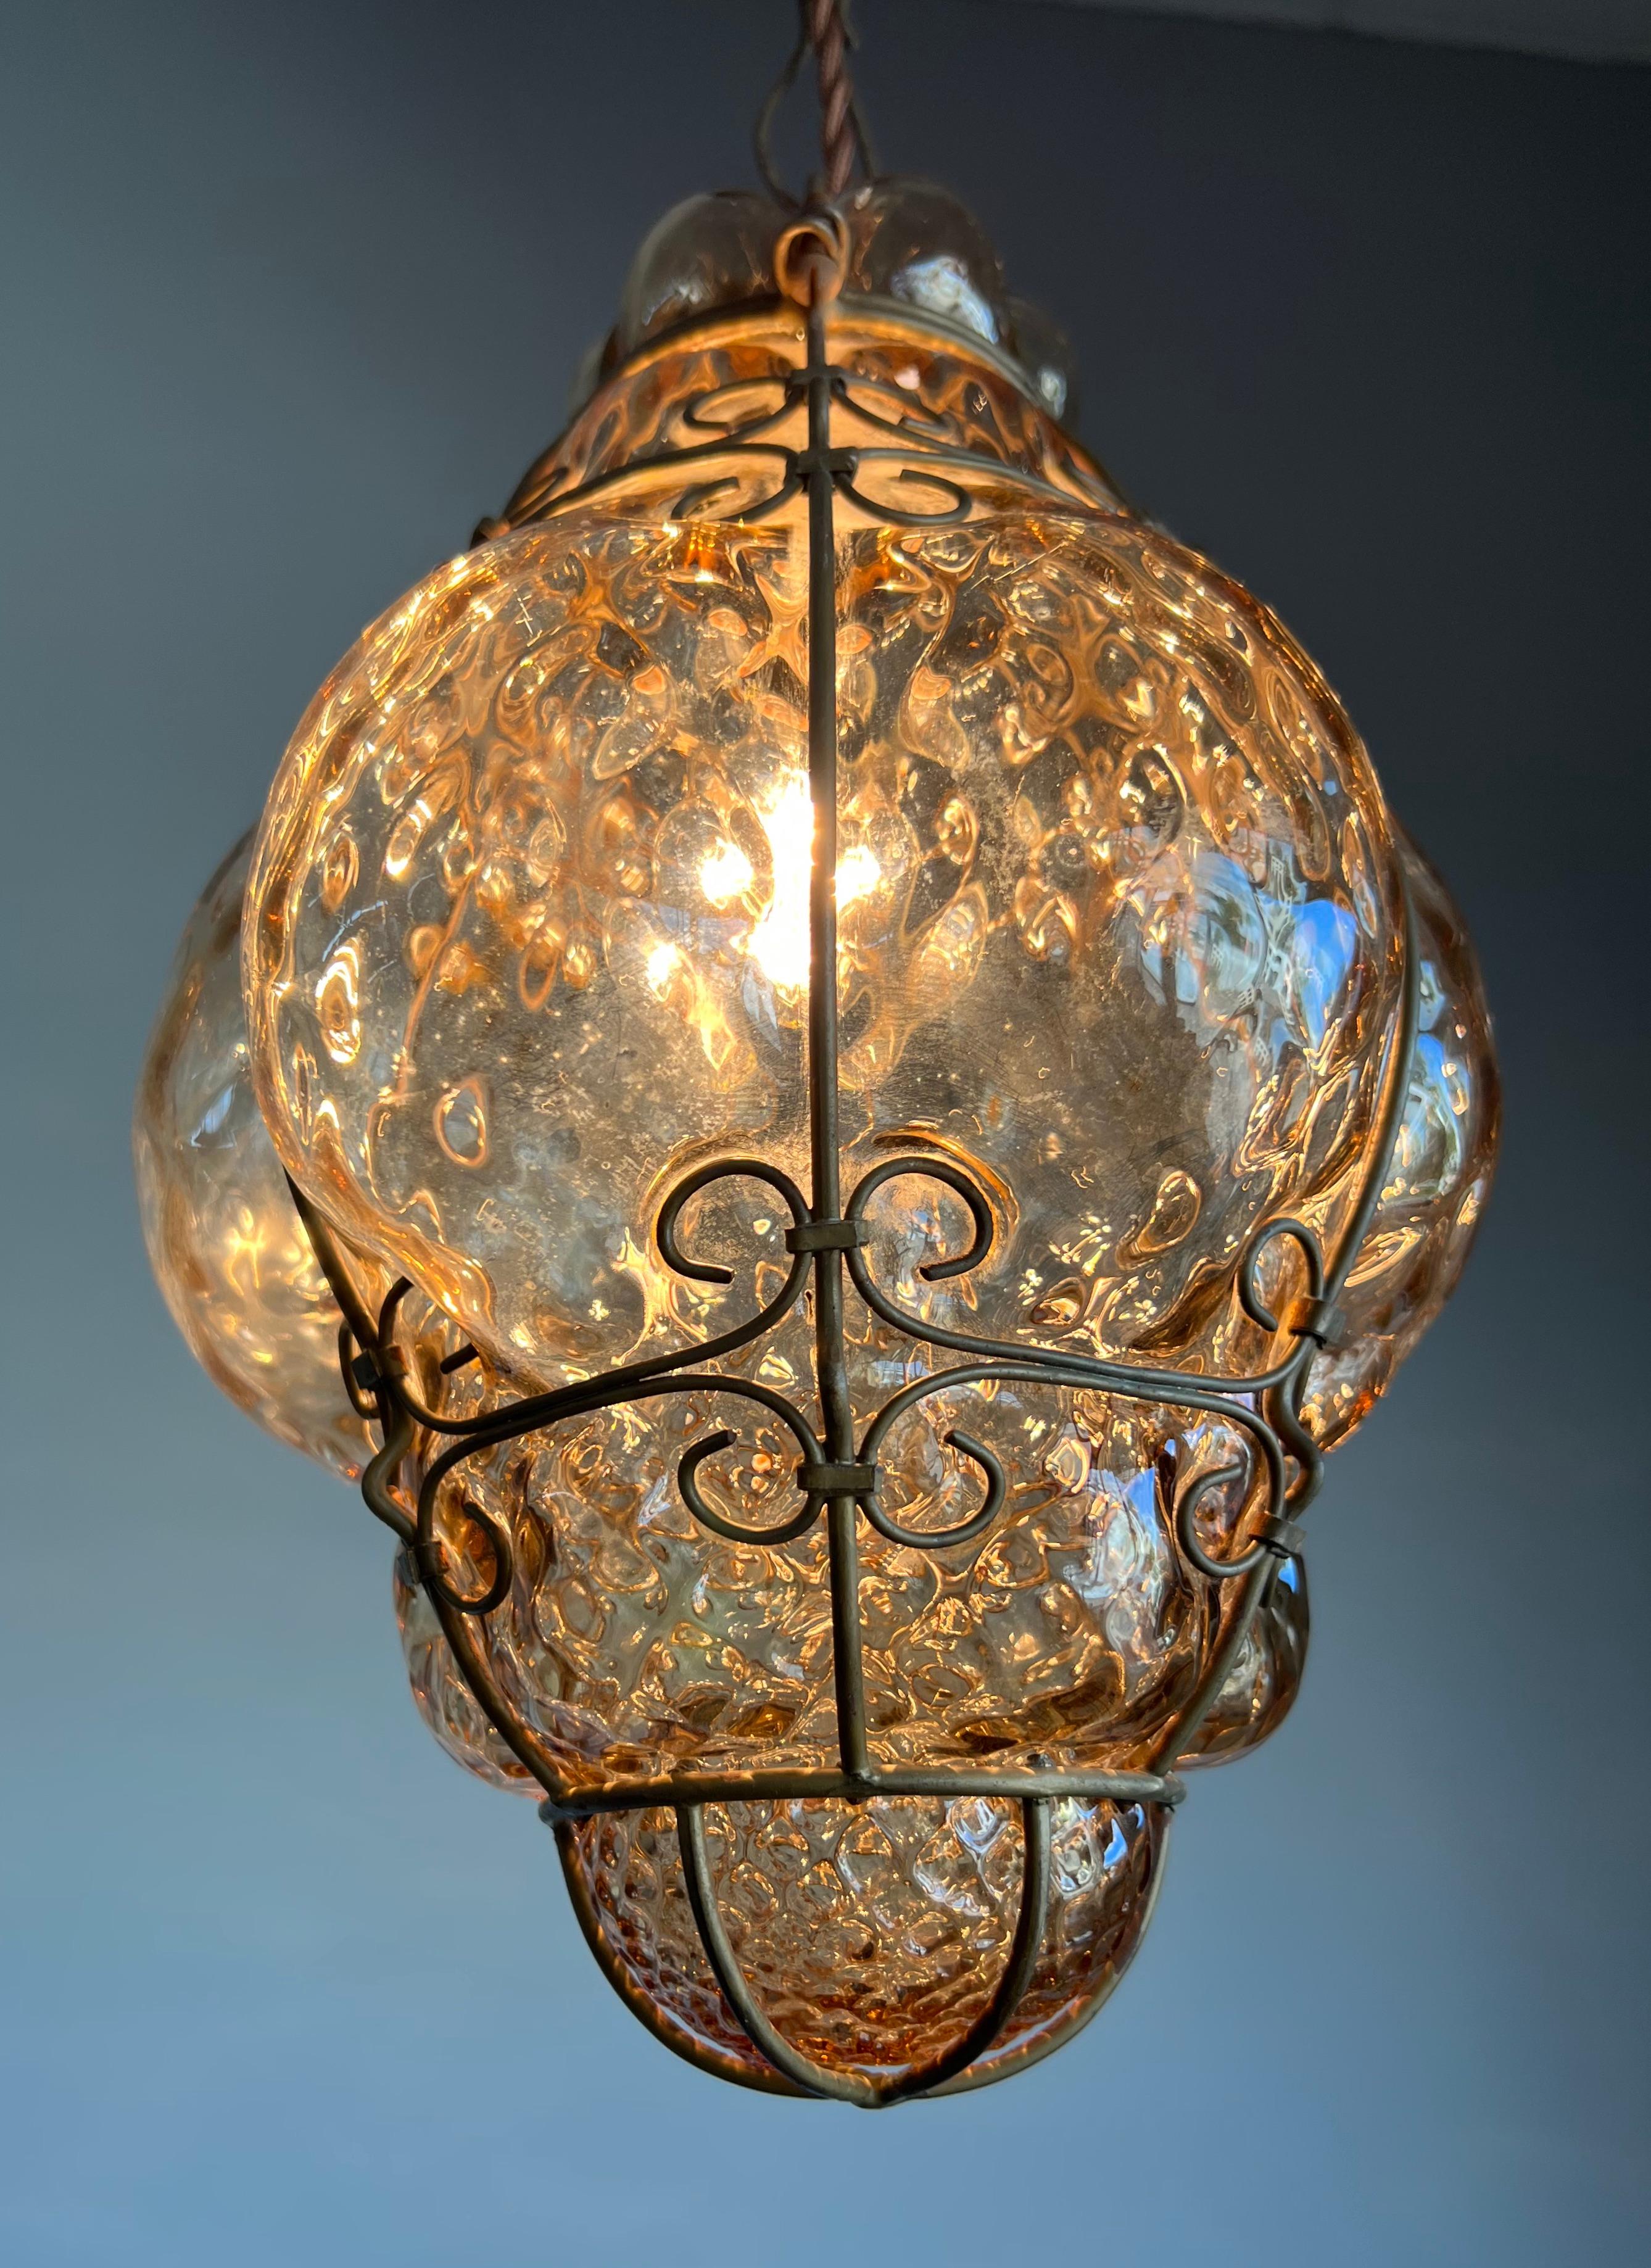 Patinated Small Antique Venetian Mouth Blown Smoked Glass Art in Iron Frame Pendant Light For Sale